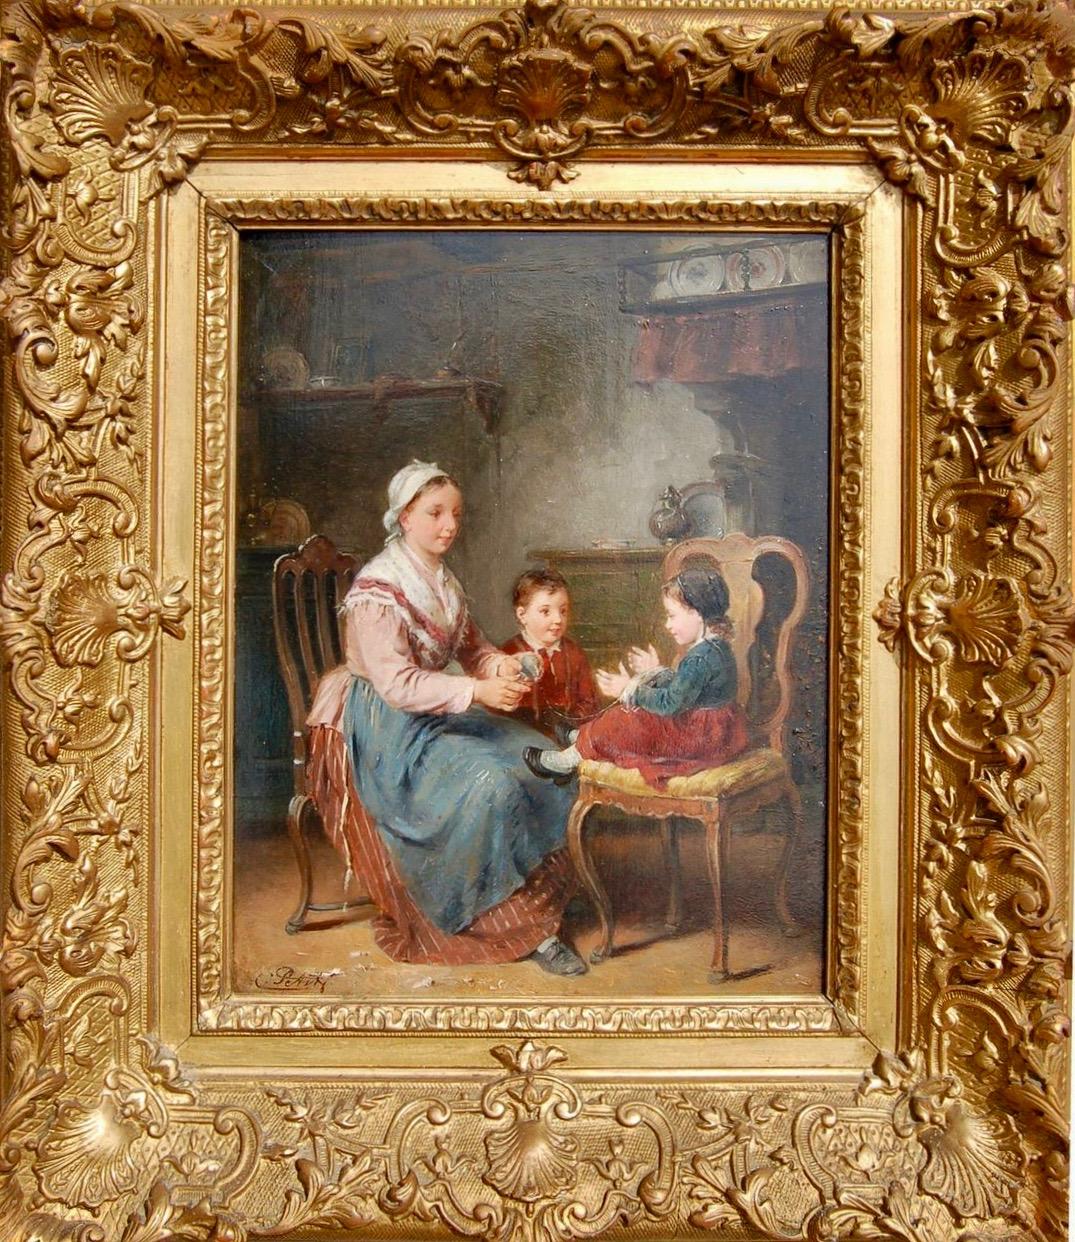 Charles Petit Interior Painting - 19th century interior of a mother with her children playing together